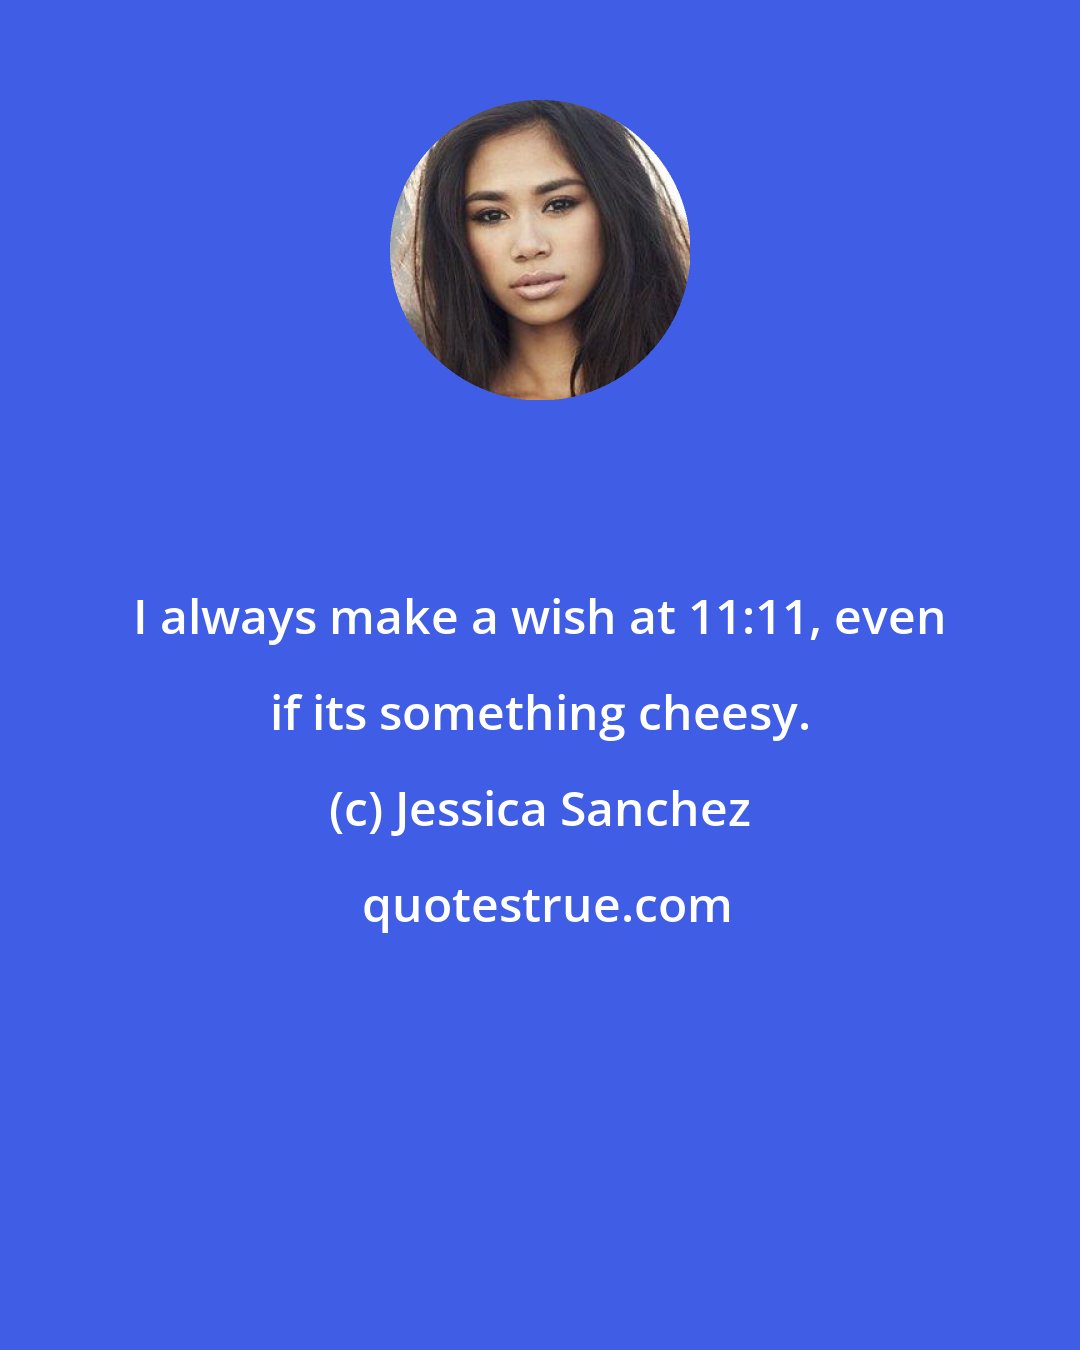 Jessica Sanchez: I always make a wish at 11:11, even if its something cheesy.